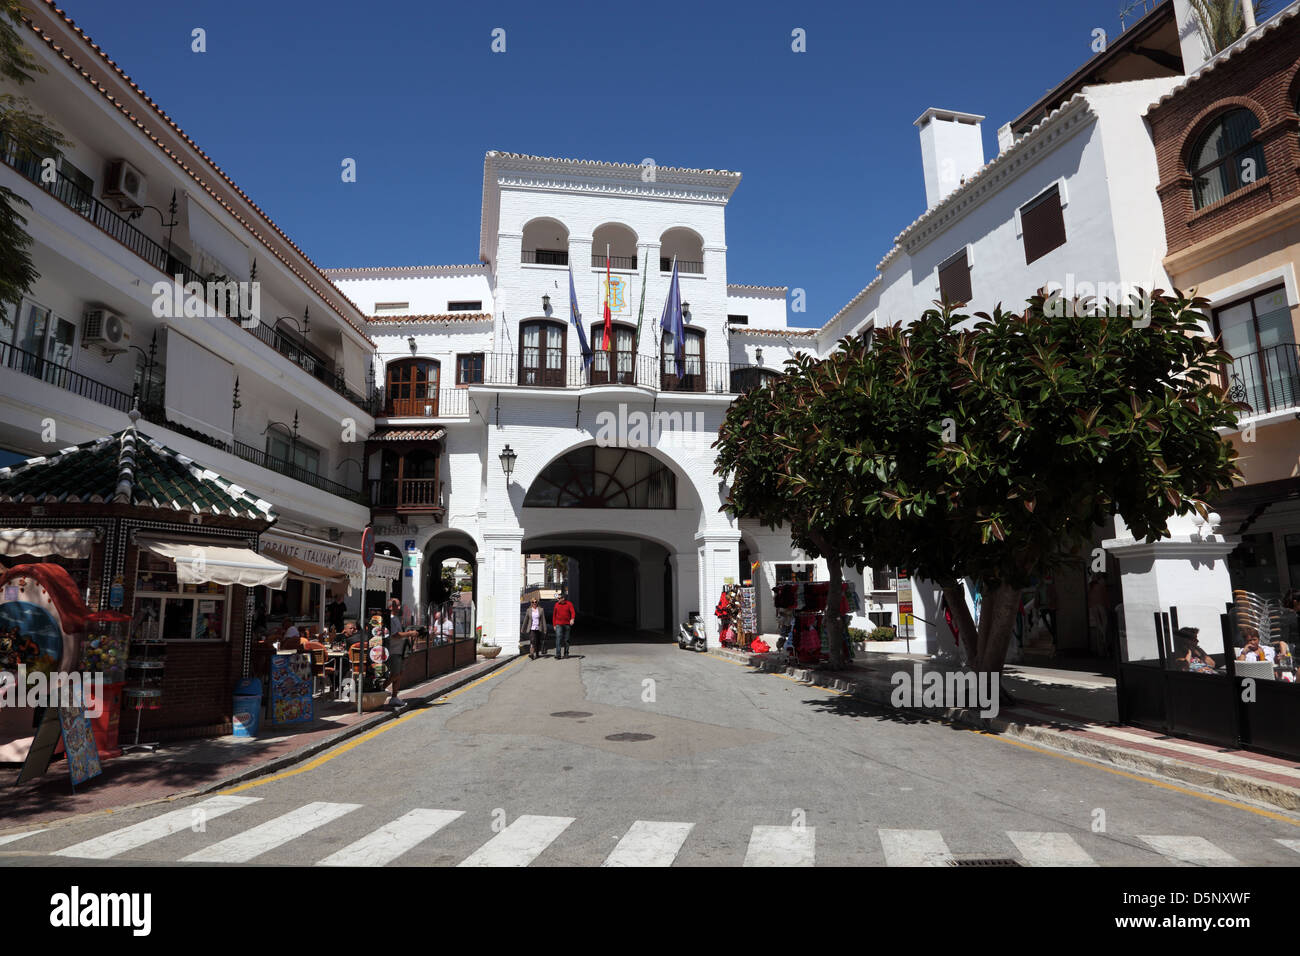 Street in Andalusian town Nerja, Province of Malaga, Spain Stock Photo